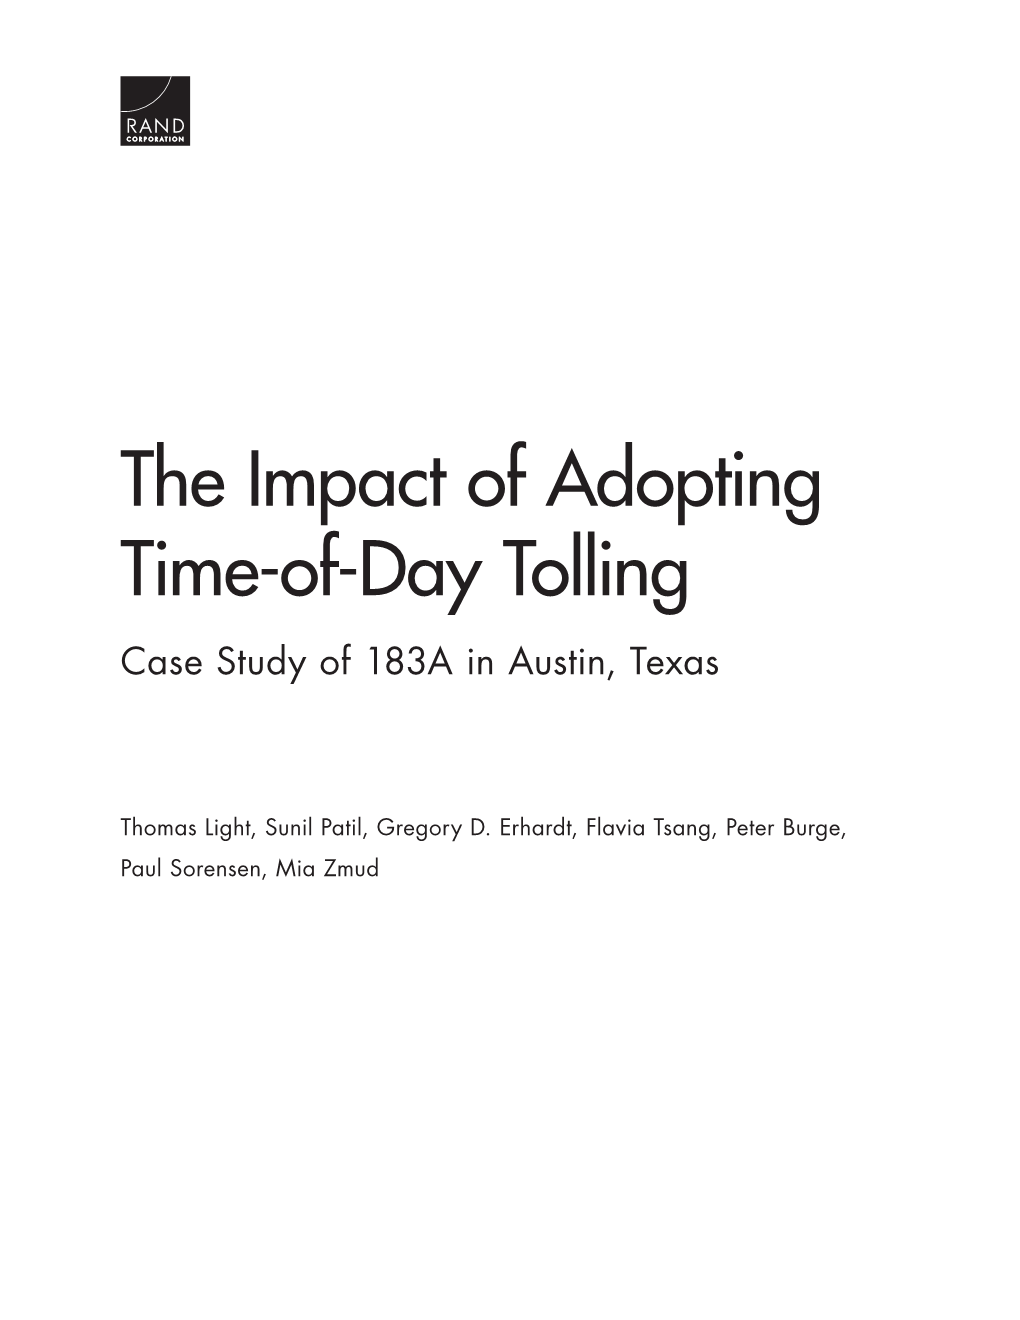 The Impact of Adopting Time-Of-Day Tolling: Case Study of 183A in Austin, Texas Tolled Roads